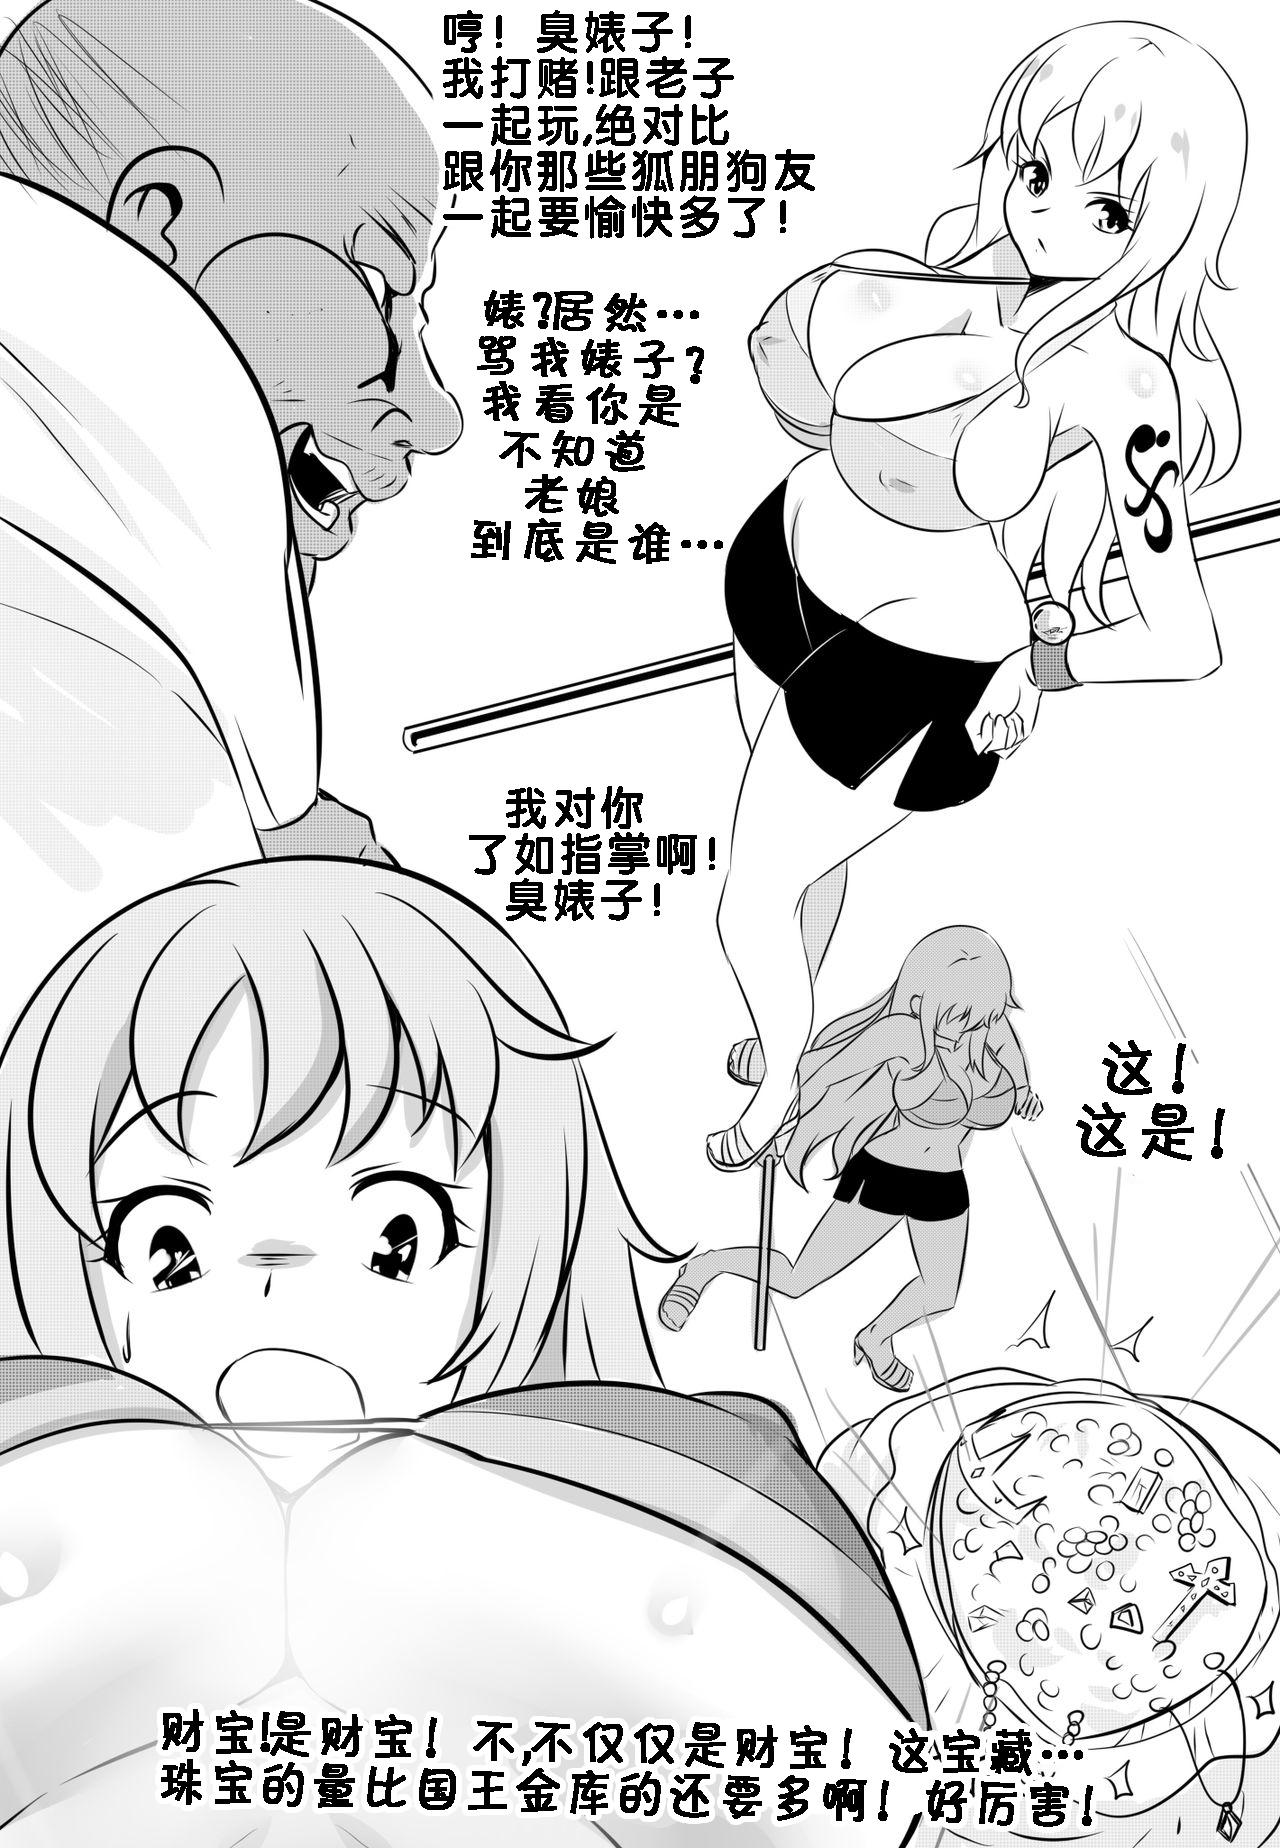 Free Wenching 3 Nami Uncensored - One piece Sexcam - Page 4